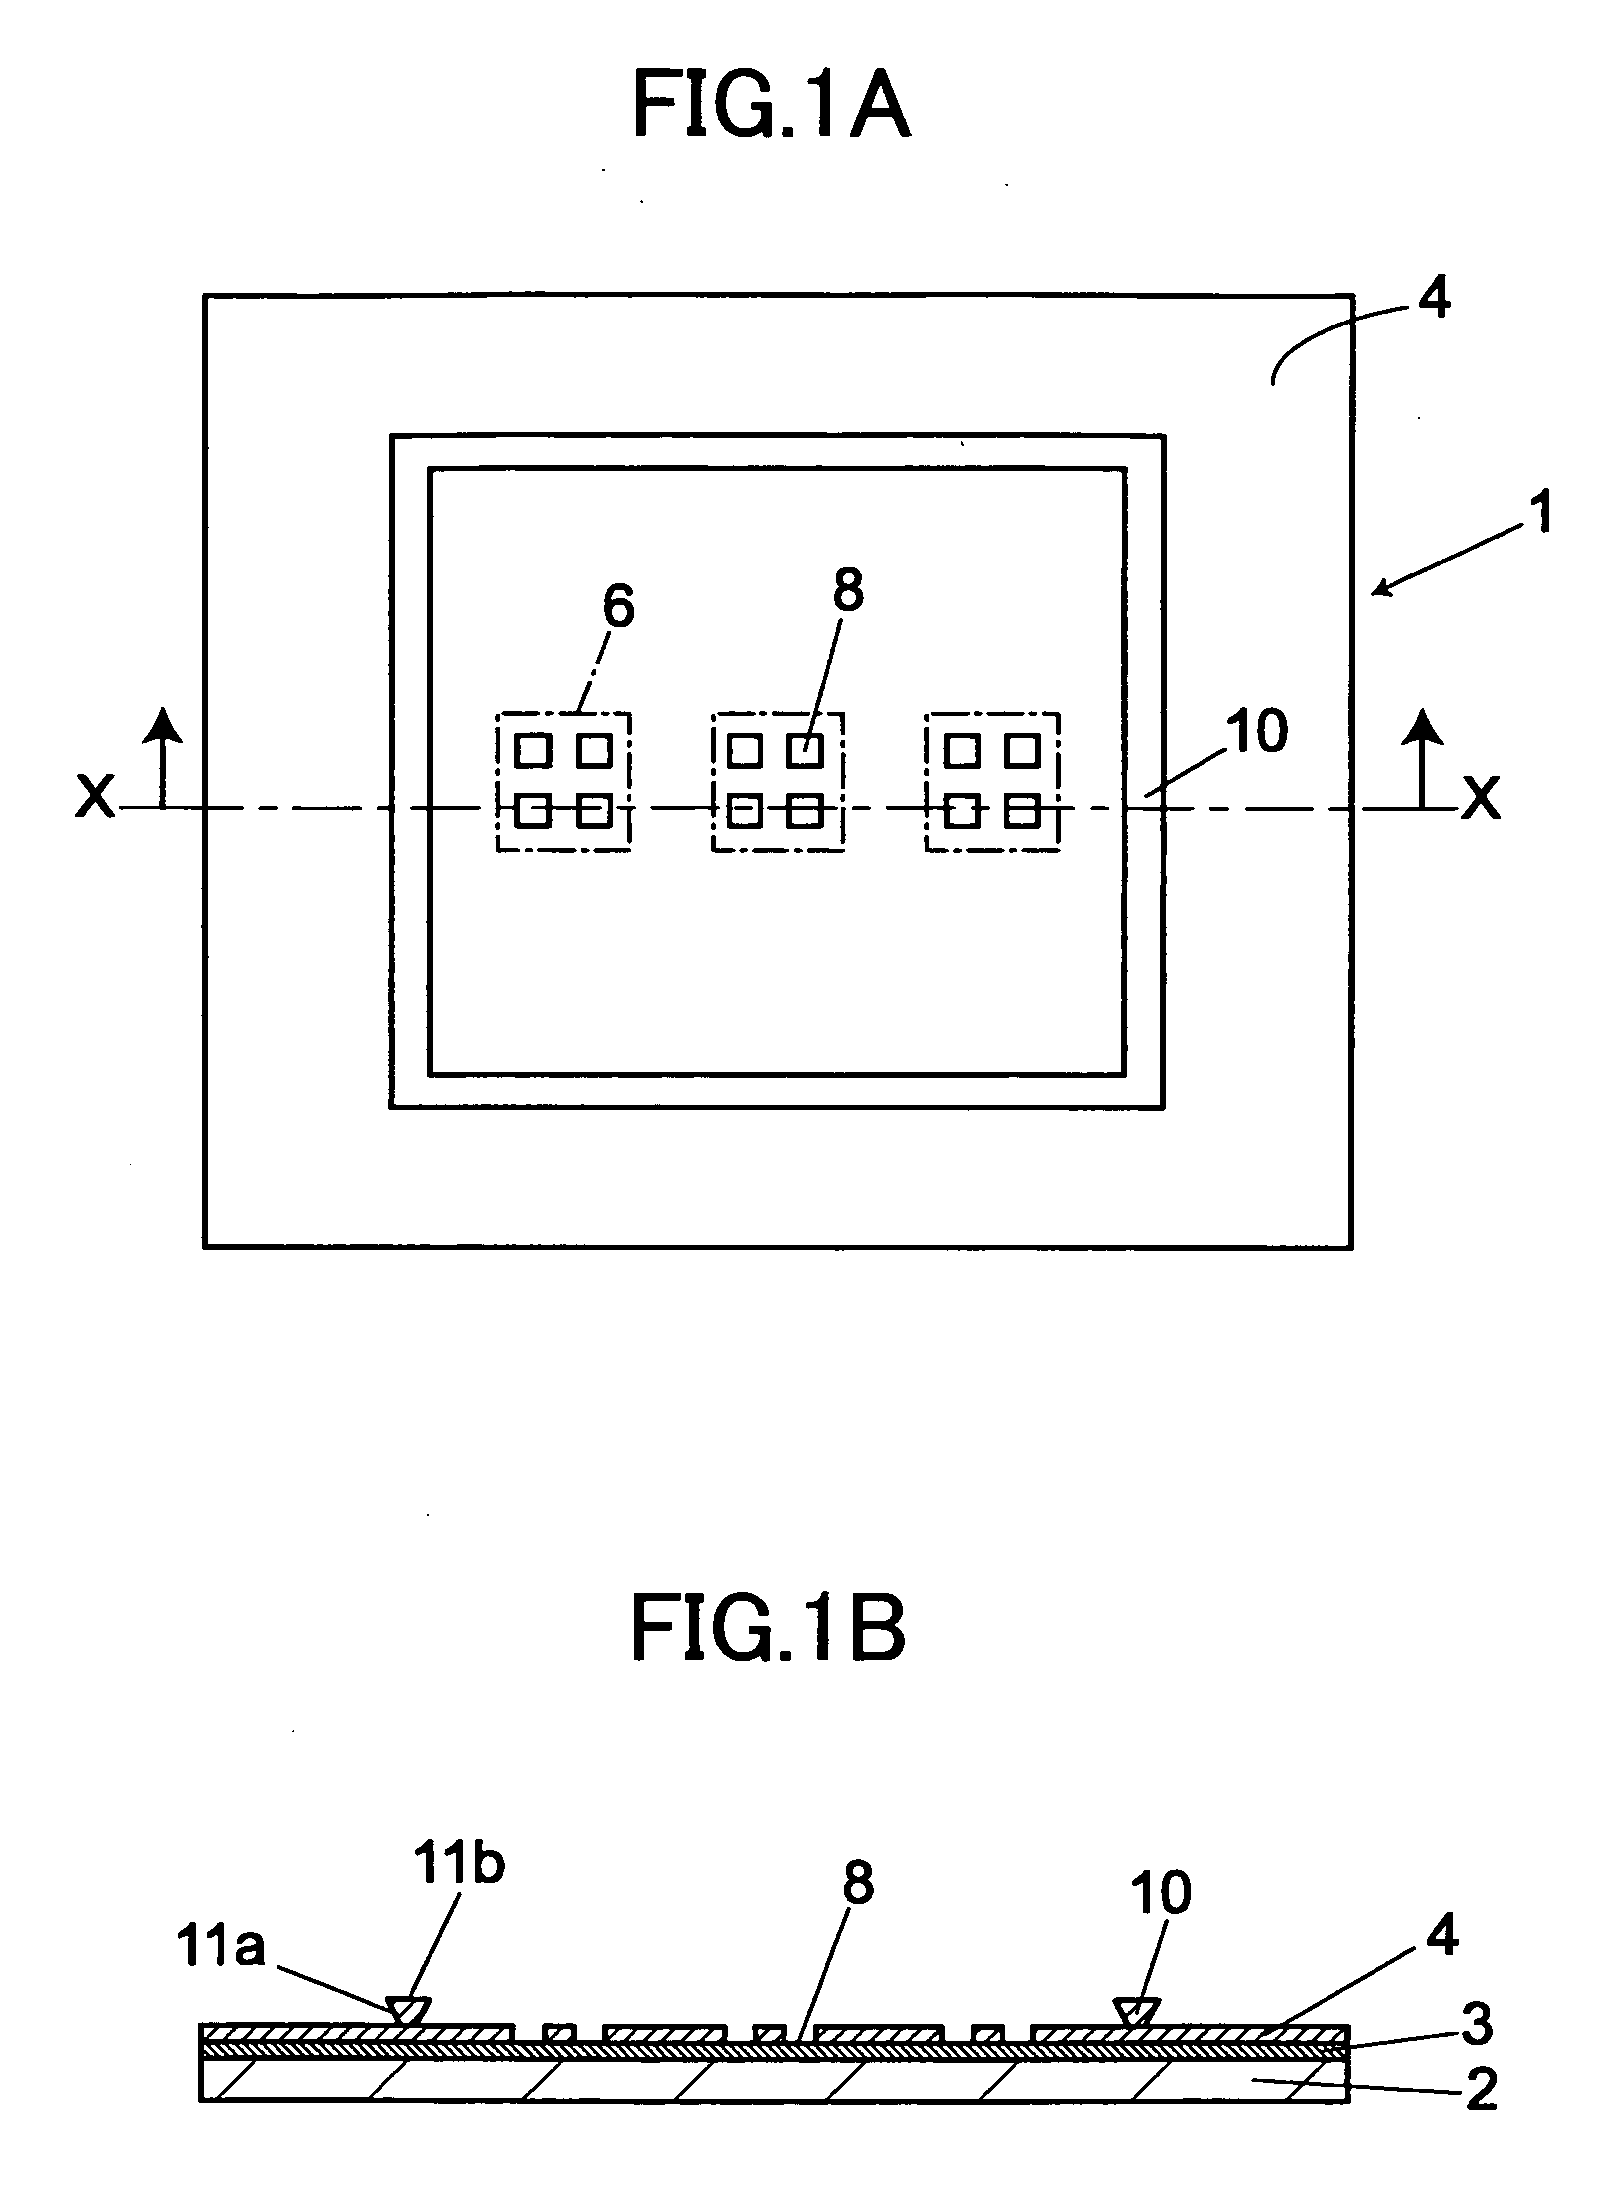 Printed circuit board, method of producing the same, and electronic unit